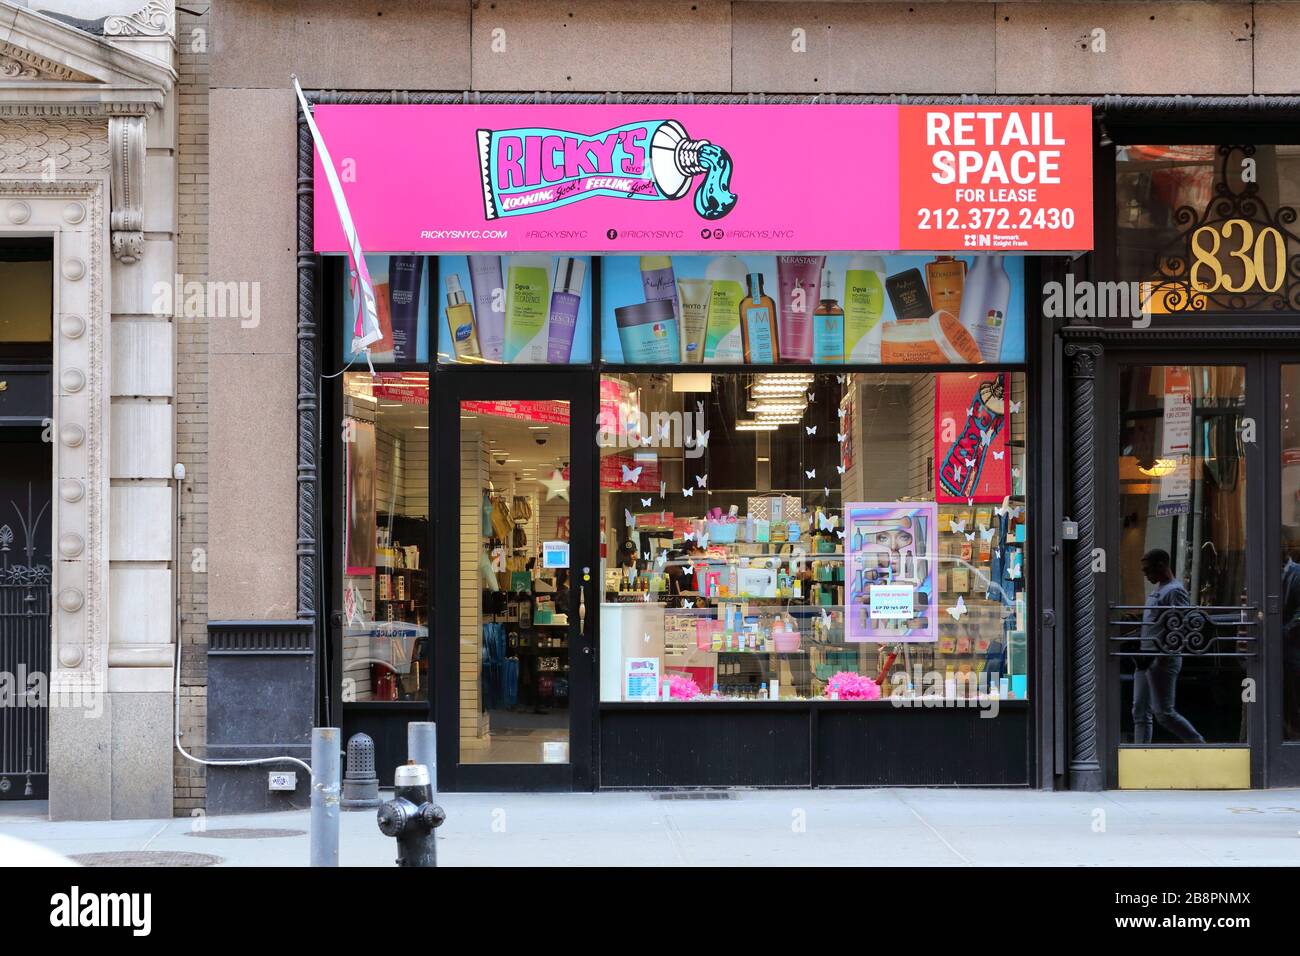 [historical storefront] Ricky's NYC, 830 Broadway, New York, NYC storefront photo of a cosmetics store in Union Square. Stock Photo